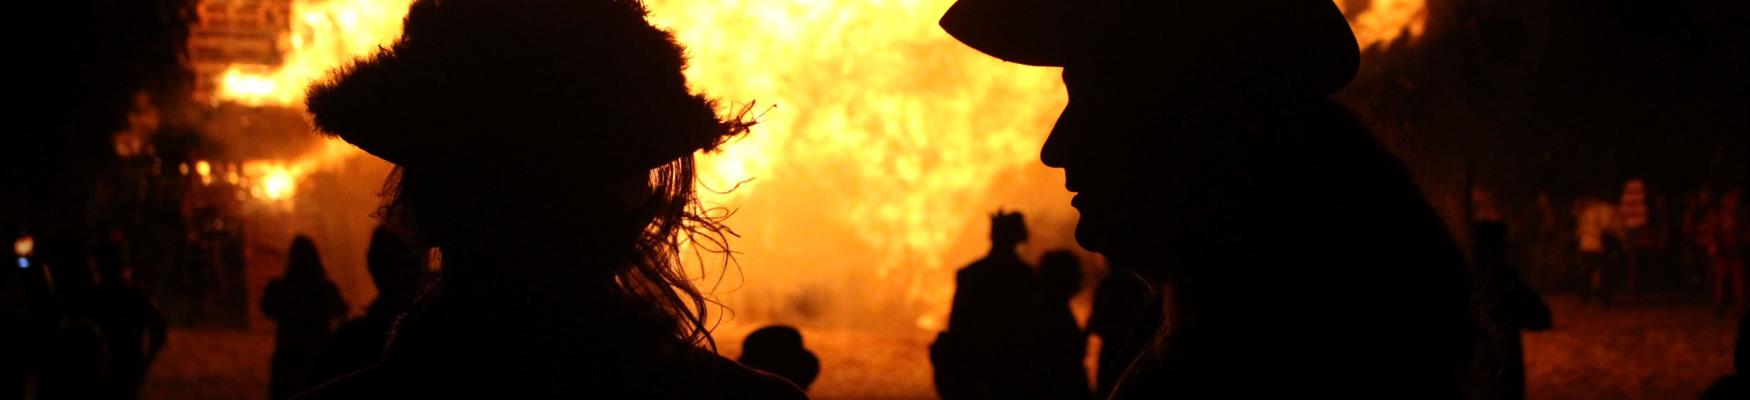 Silhouettes against the flames of a large bonfire